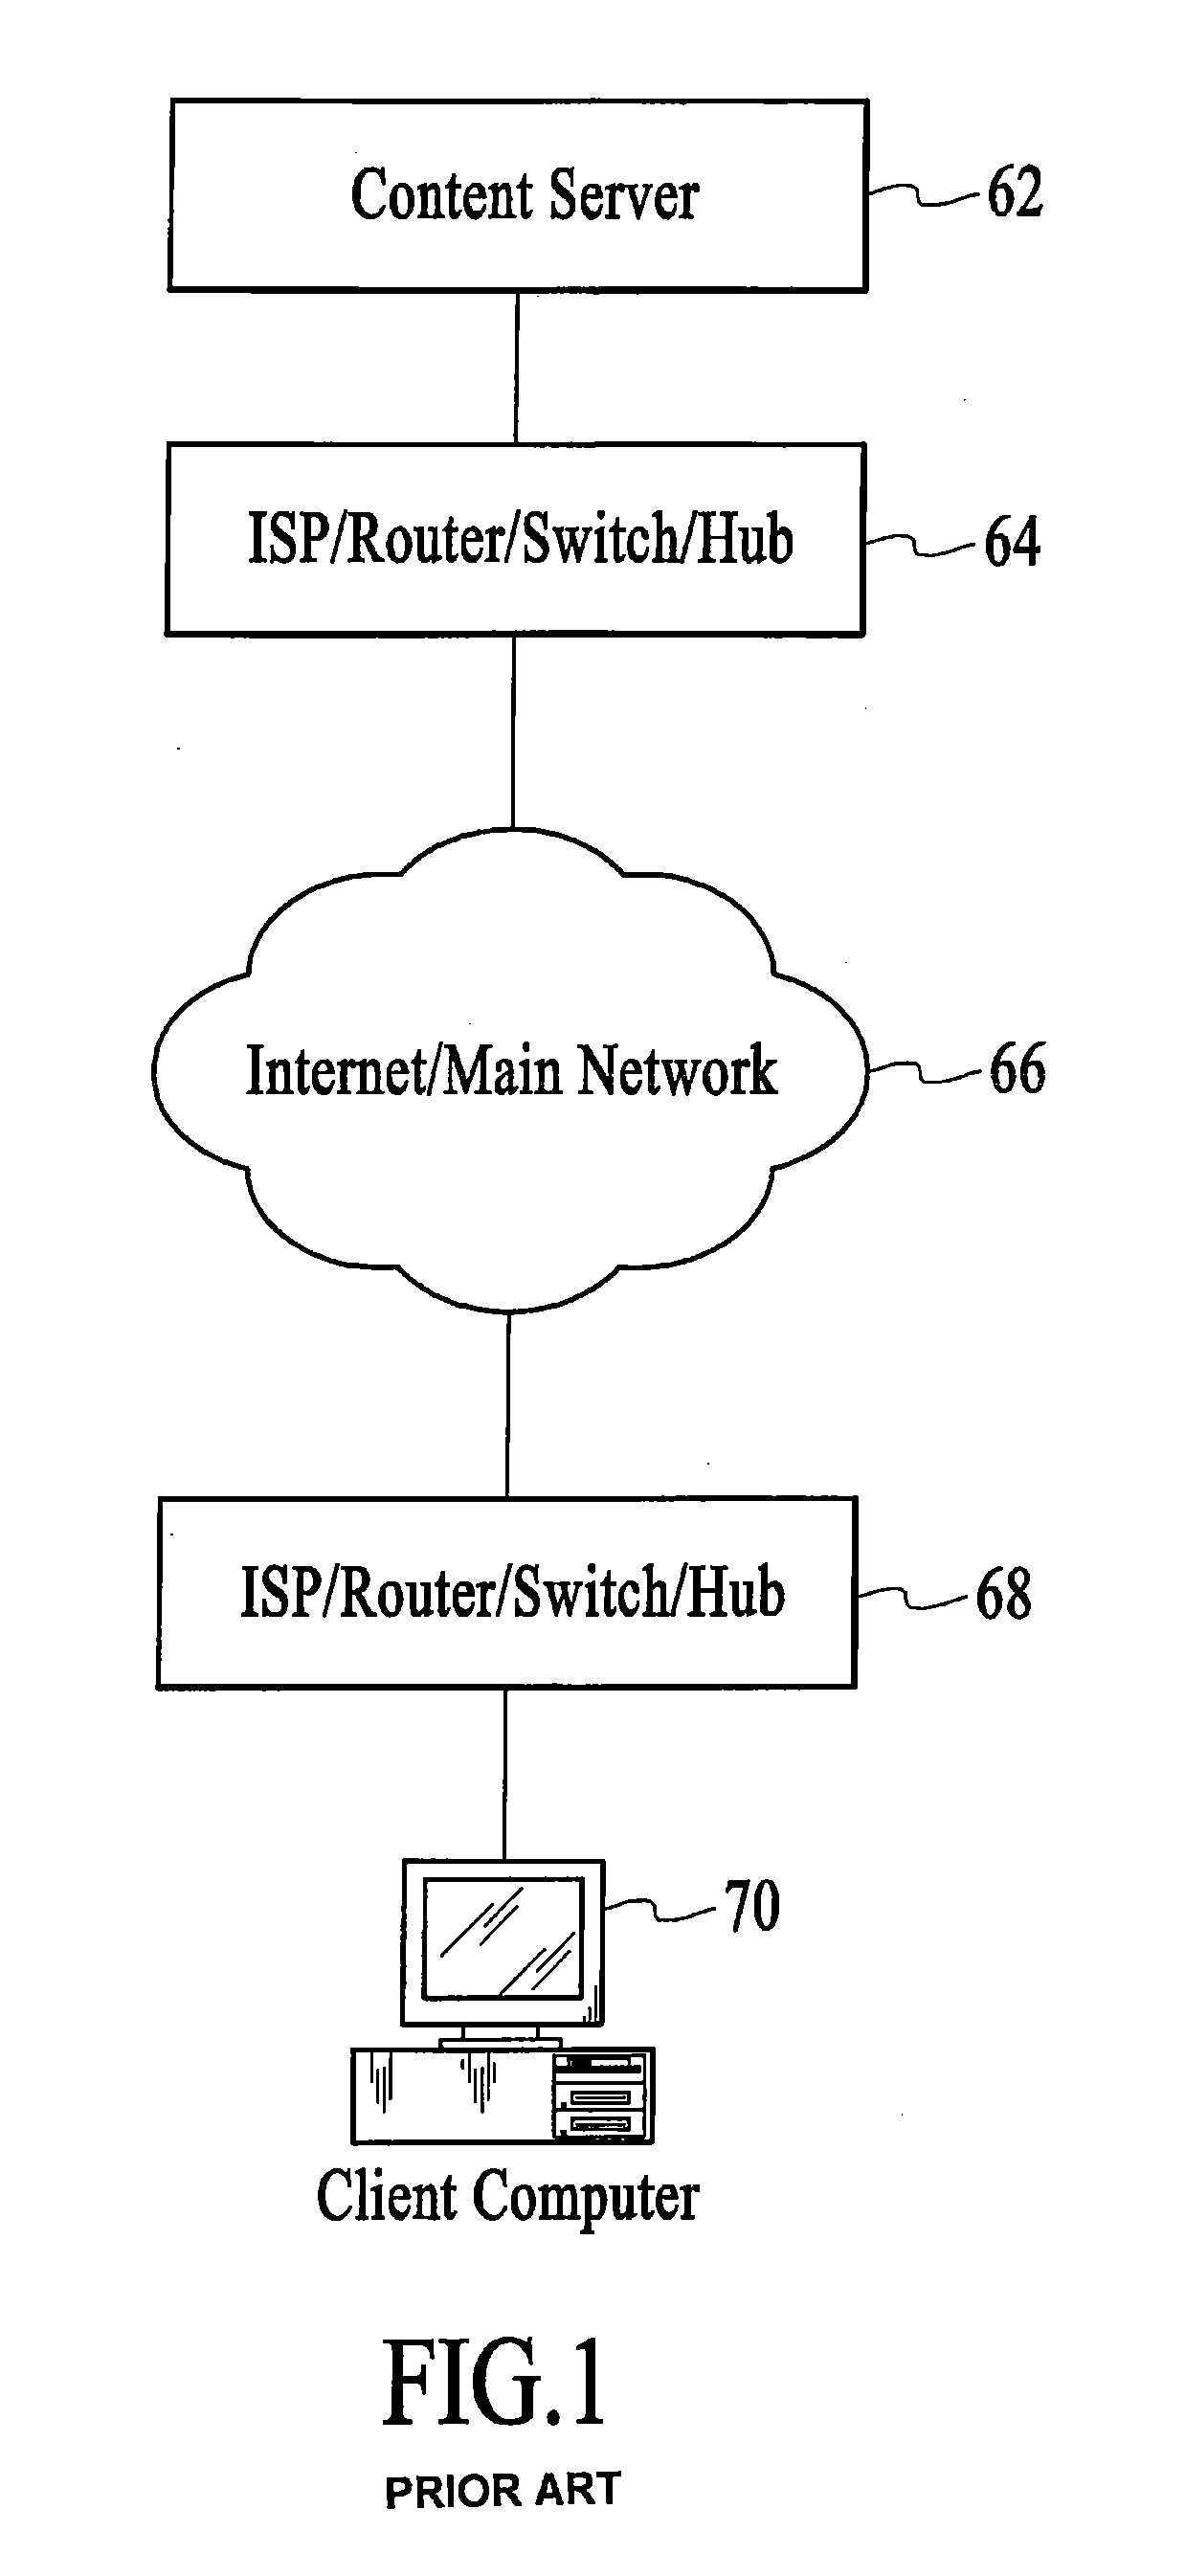 Determining client latencies over a network